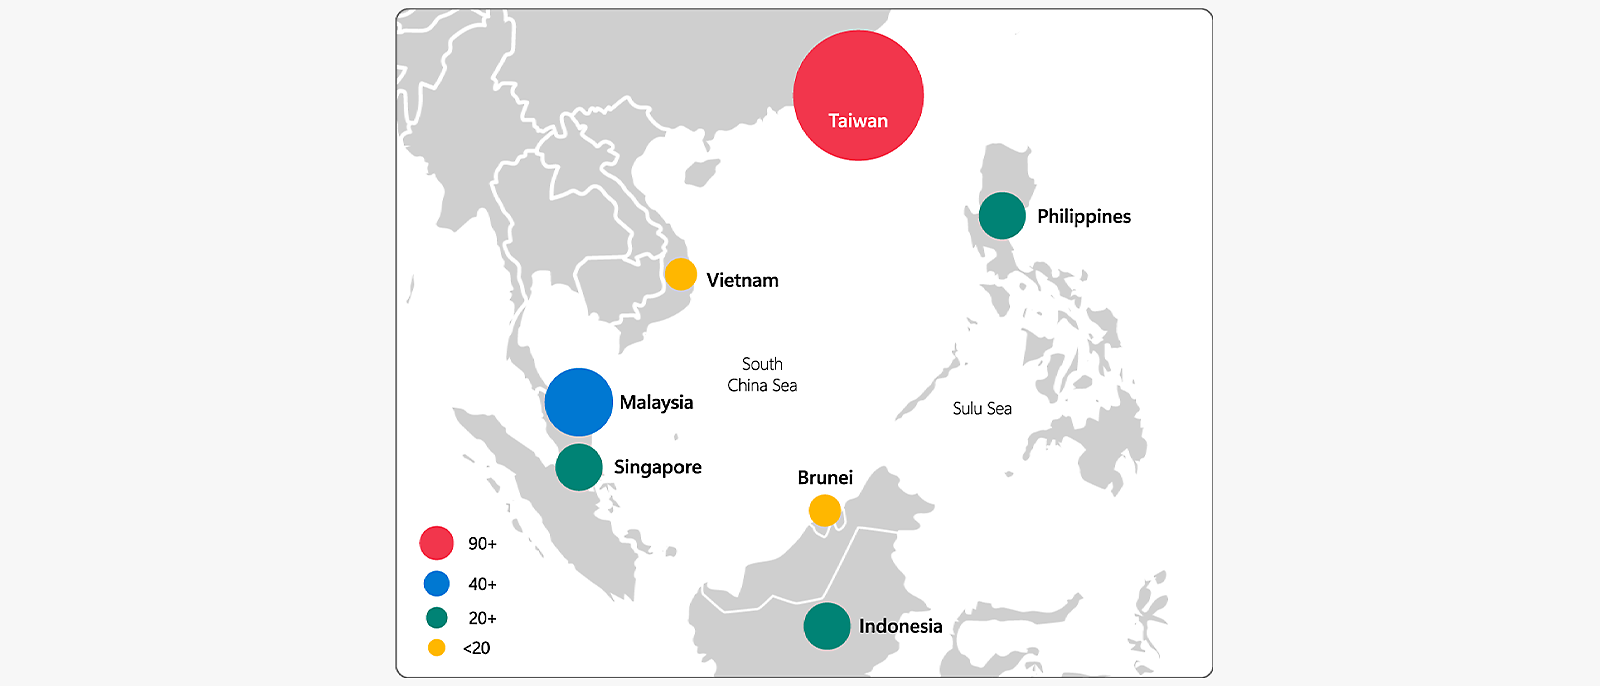 Map of South China Sea region highlighting observed events per country